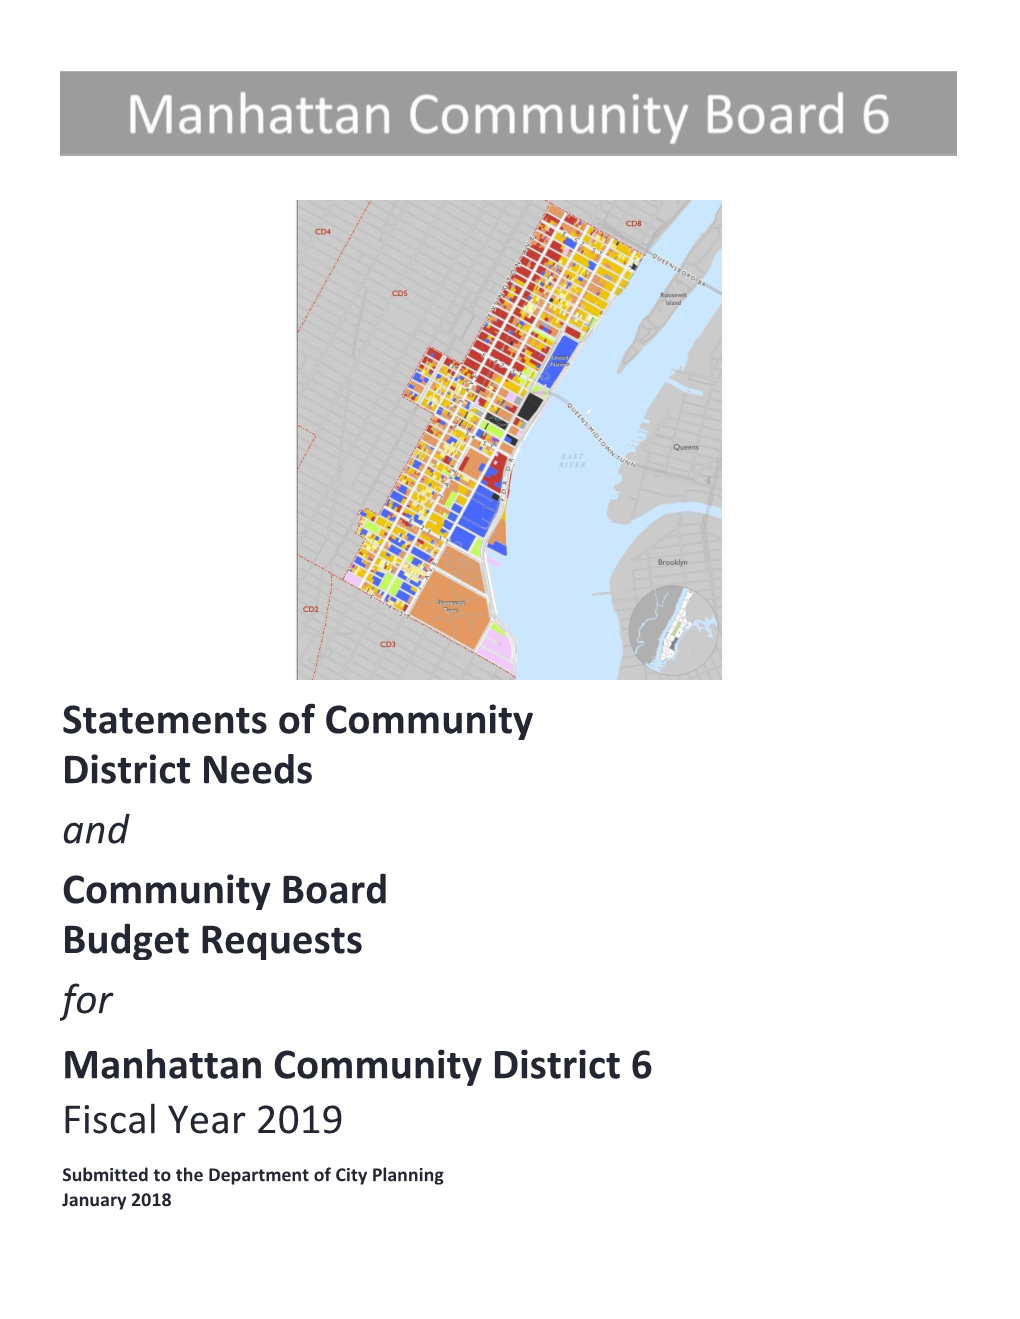 Community Board 6 Statement of Needs and Budget Request for 2019